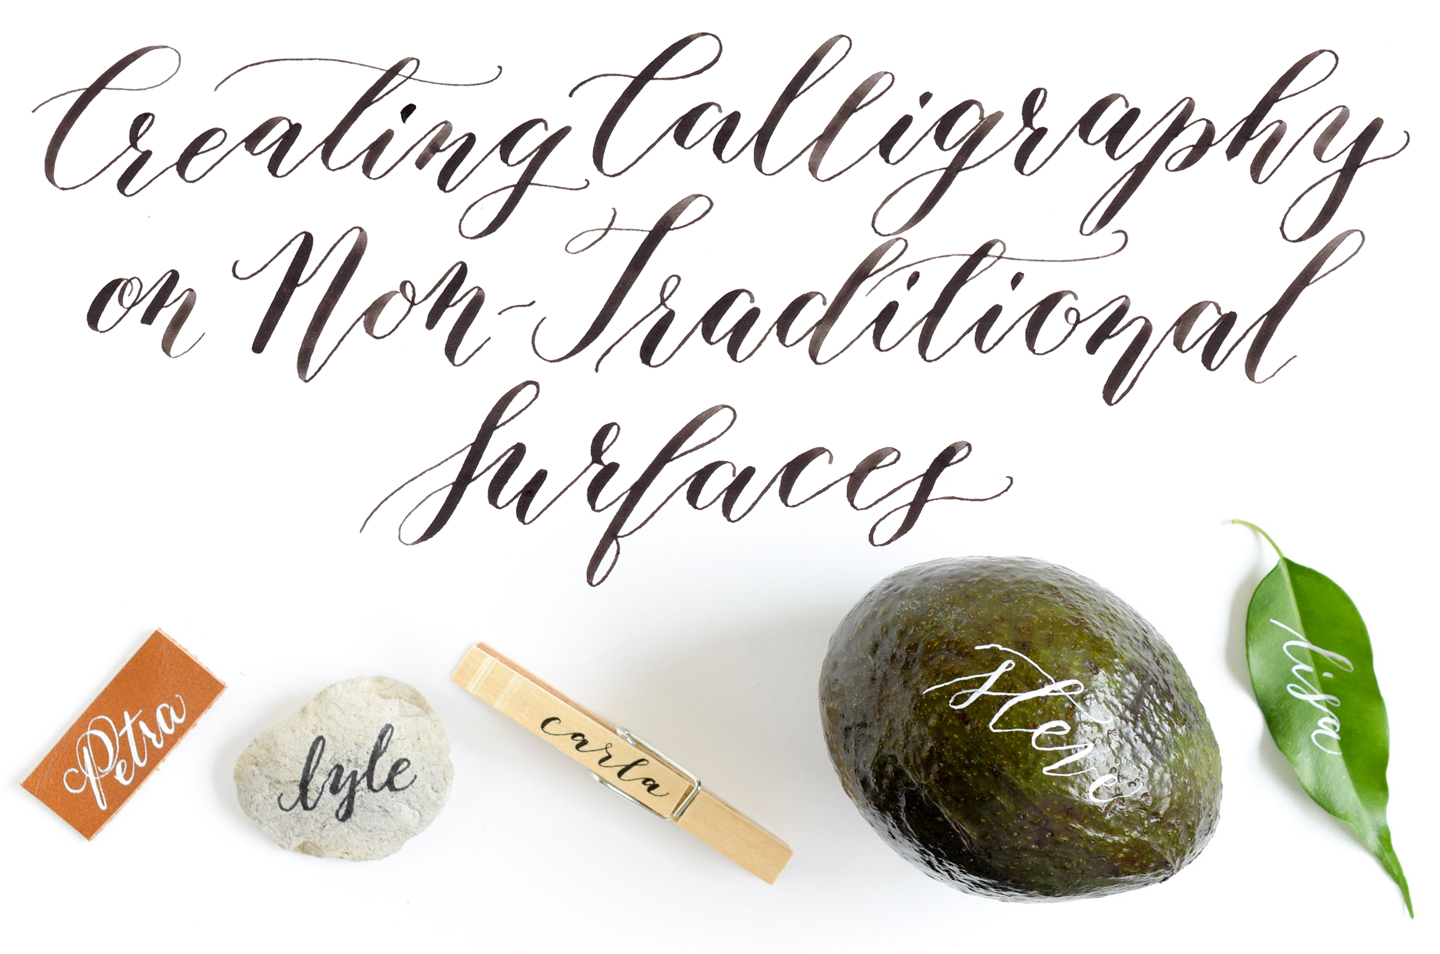 Creating Calligraphy on Non-Traditional Surfaces